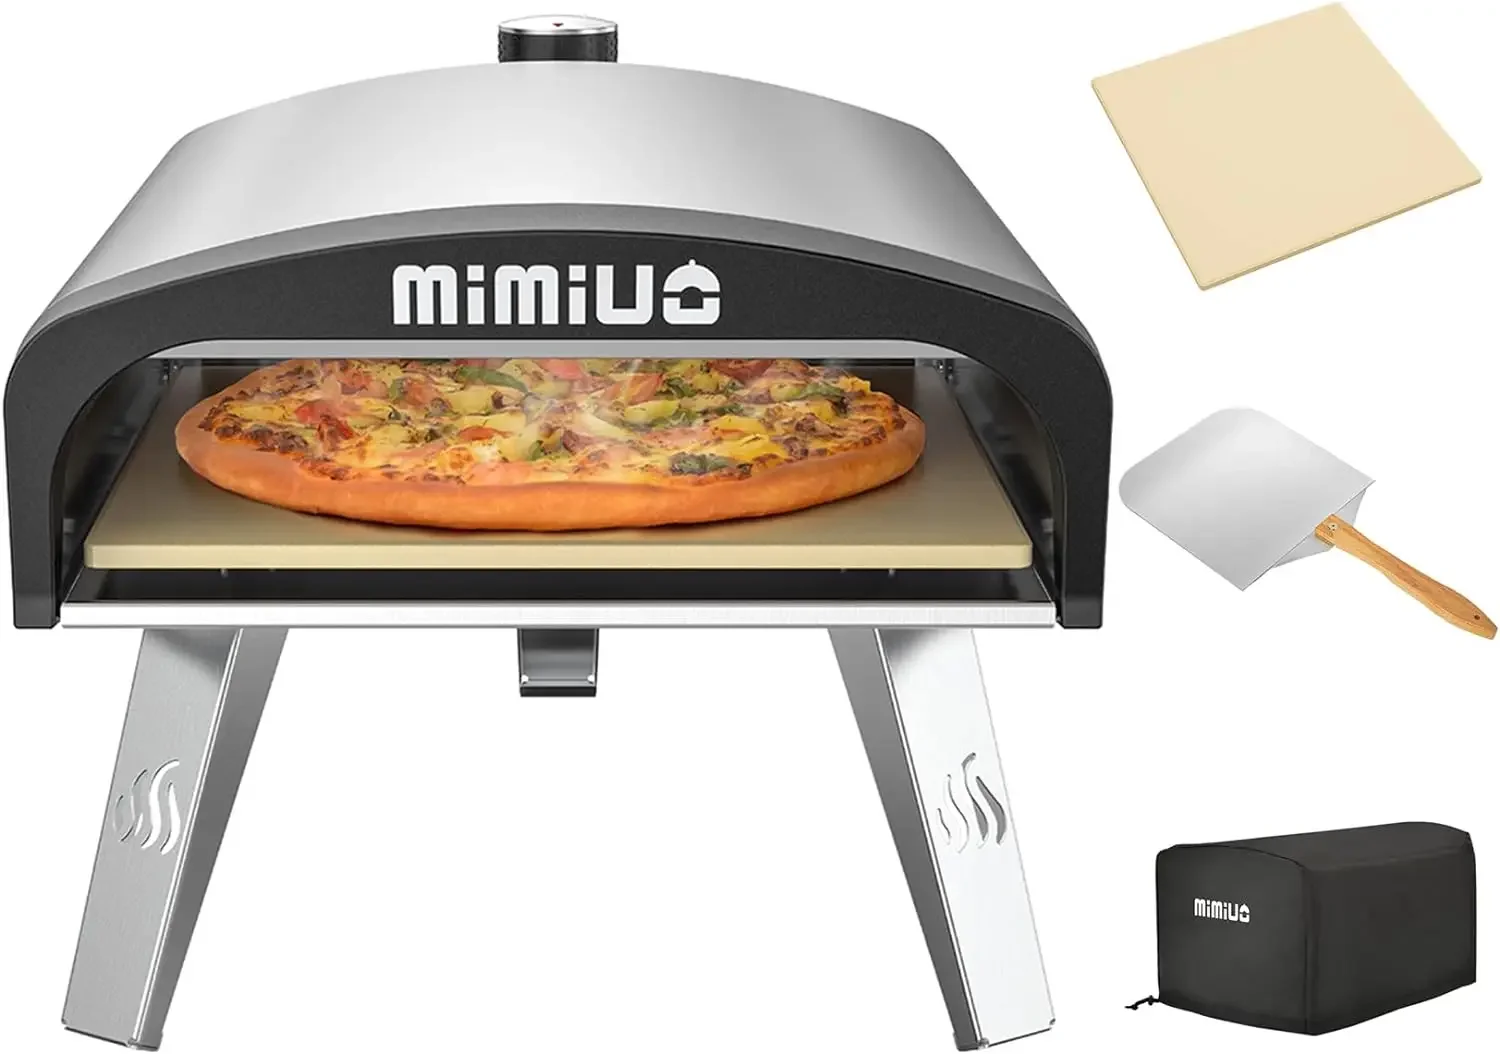 

Mimiuo Outdoor Gas Pizza Ovens Portable Stainless Steel Gas Pizza Grilling Stove with 13" Pizza Stone & 12 x 14 inch Foldable